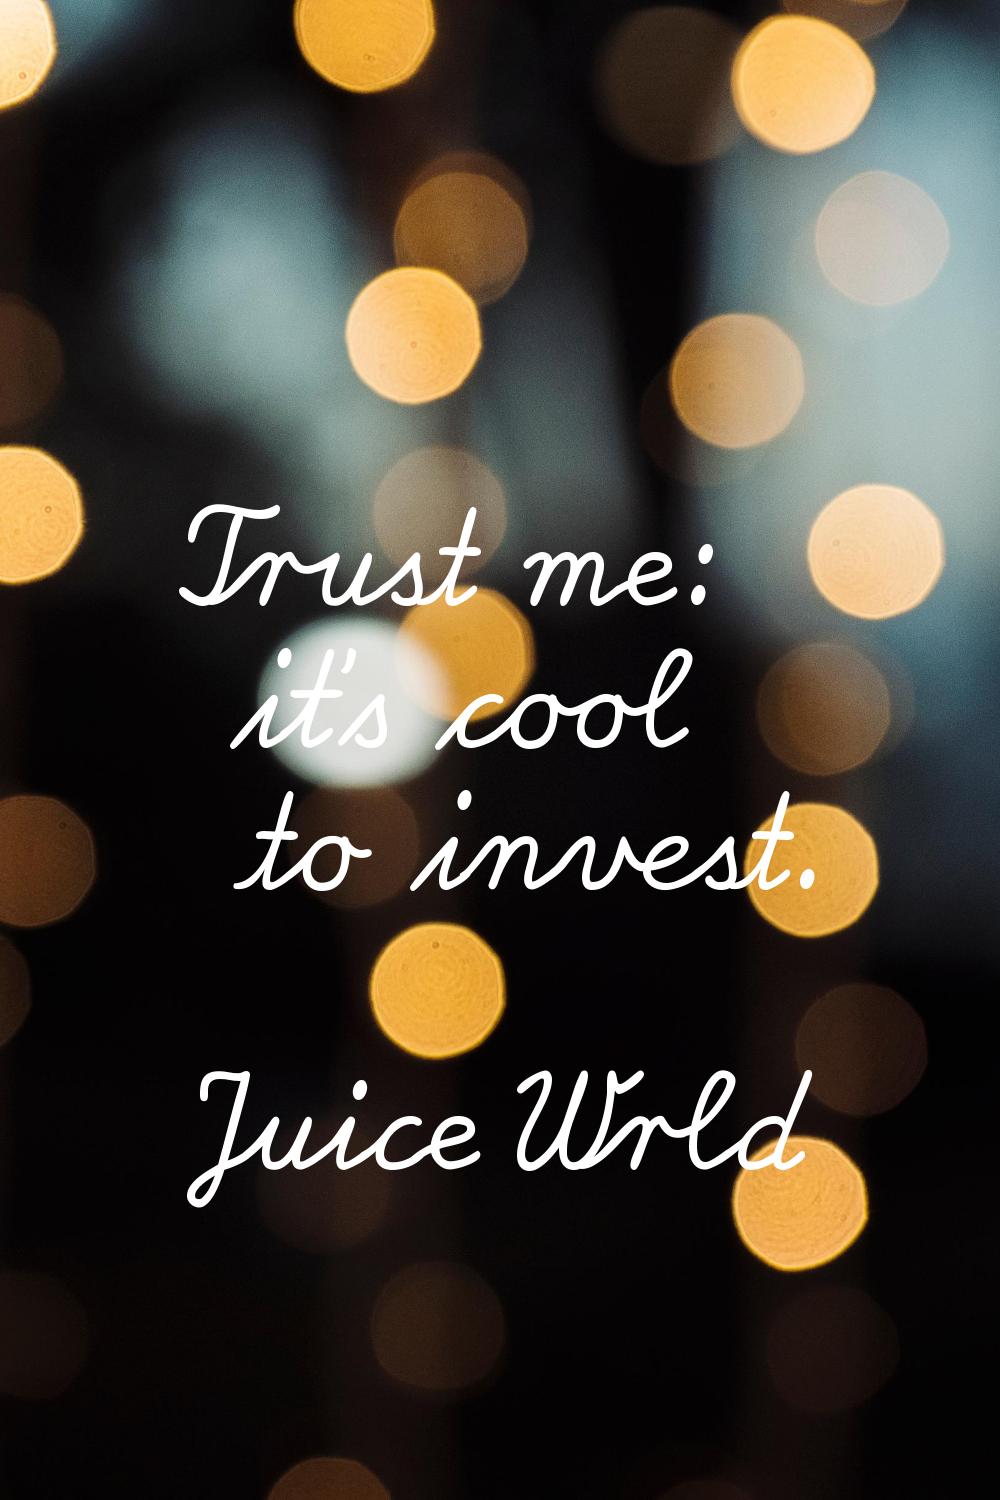 Trust me: it's cool to invest.